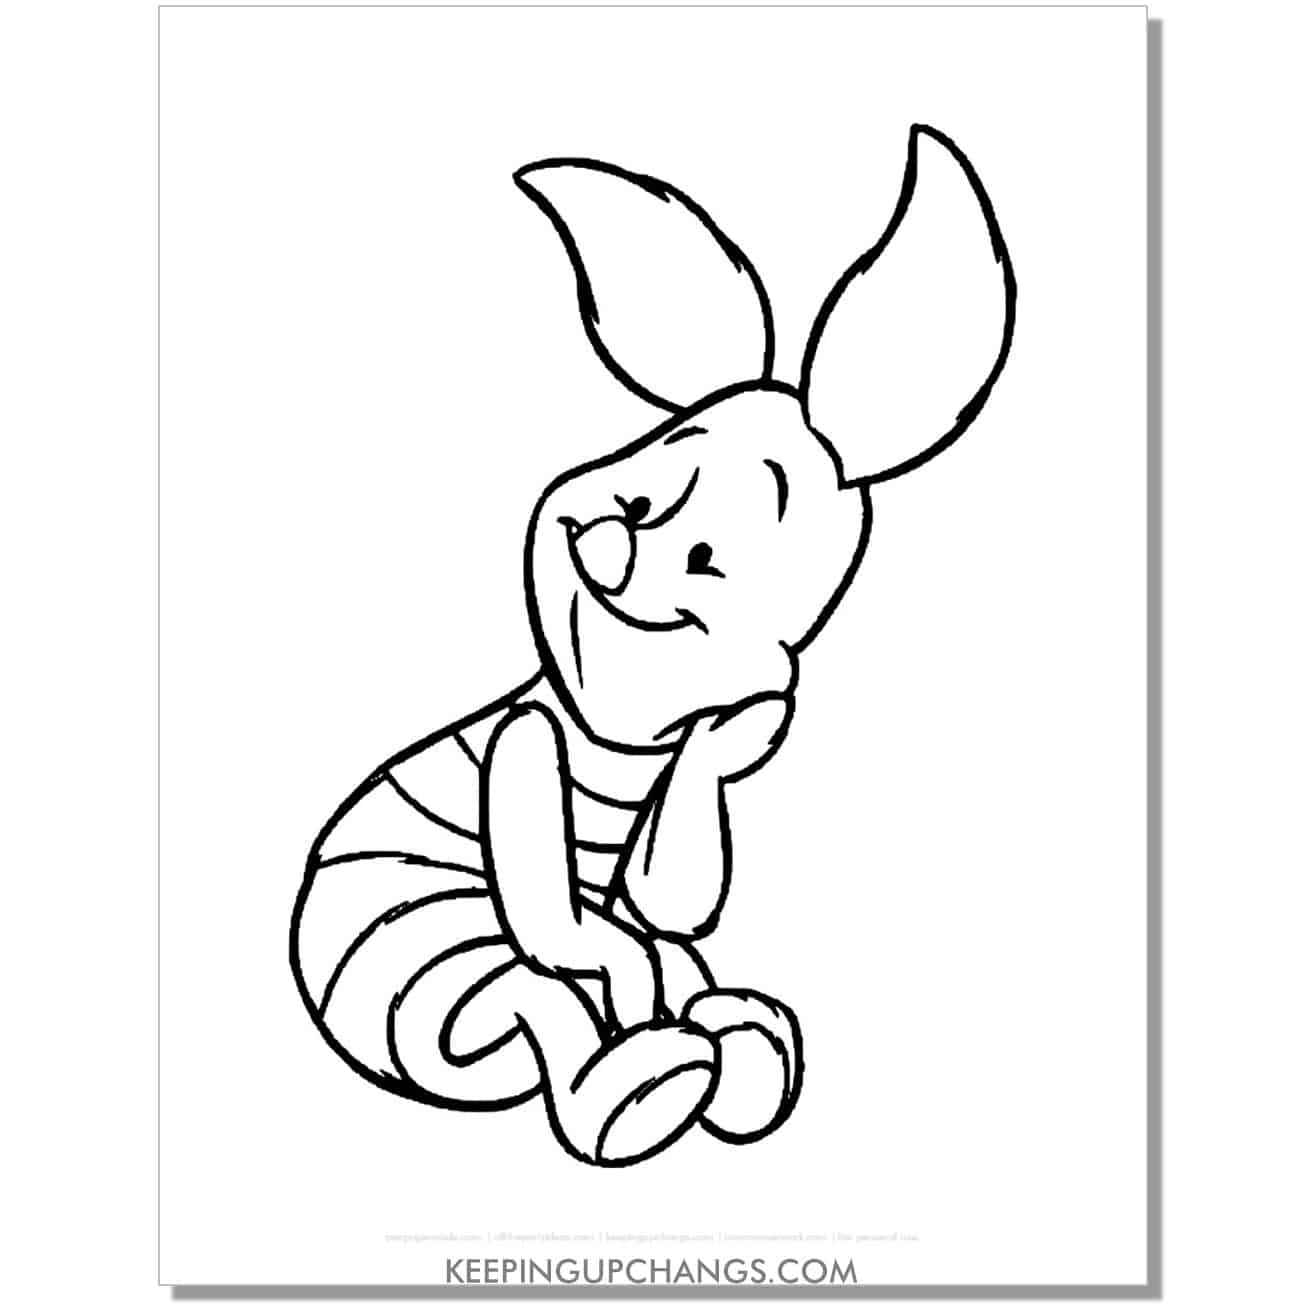 piglet sits with hands on knee and face coloring page, sheet.